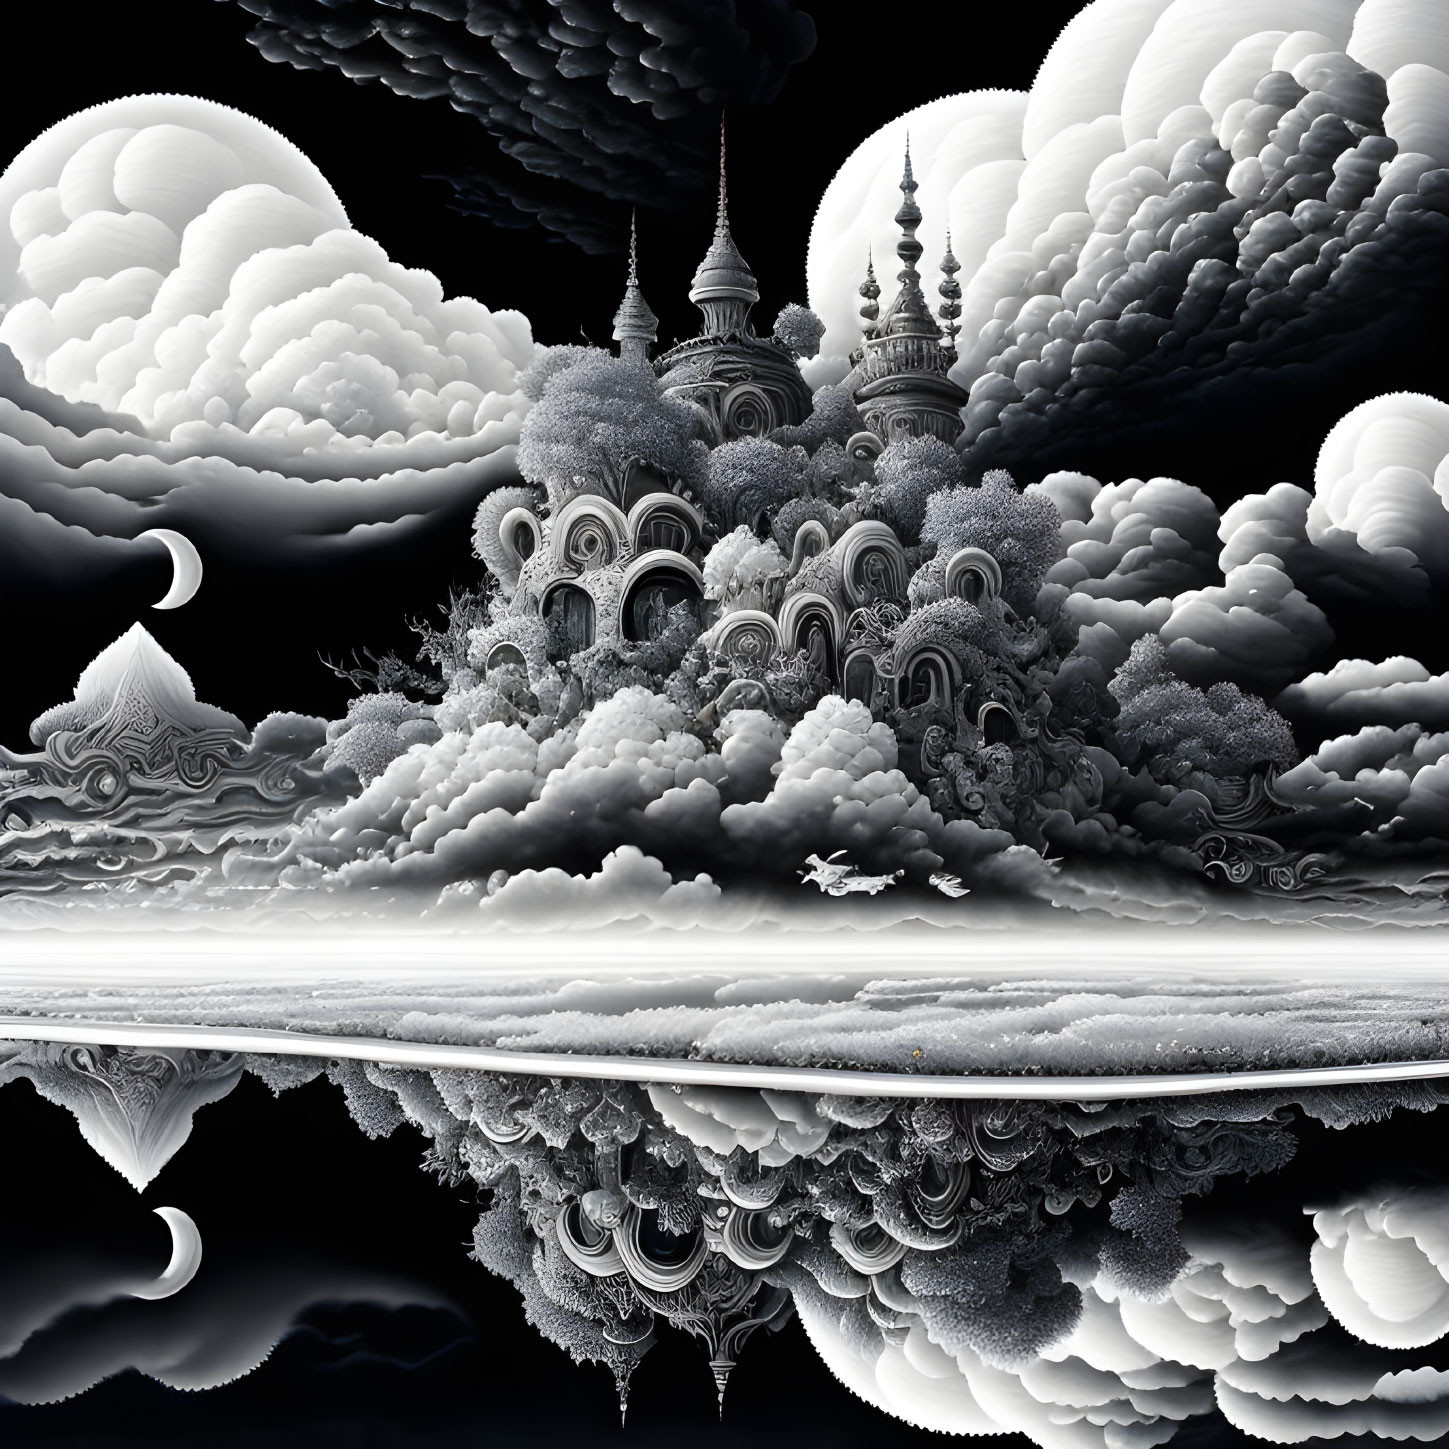 Monochrome fractal art of surreal landscape with clouds and intricate architecture